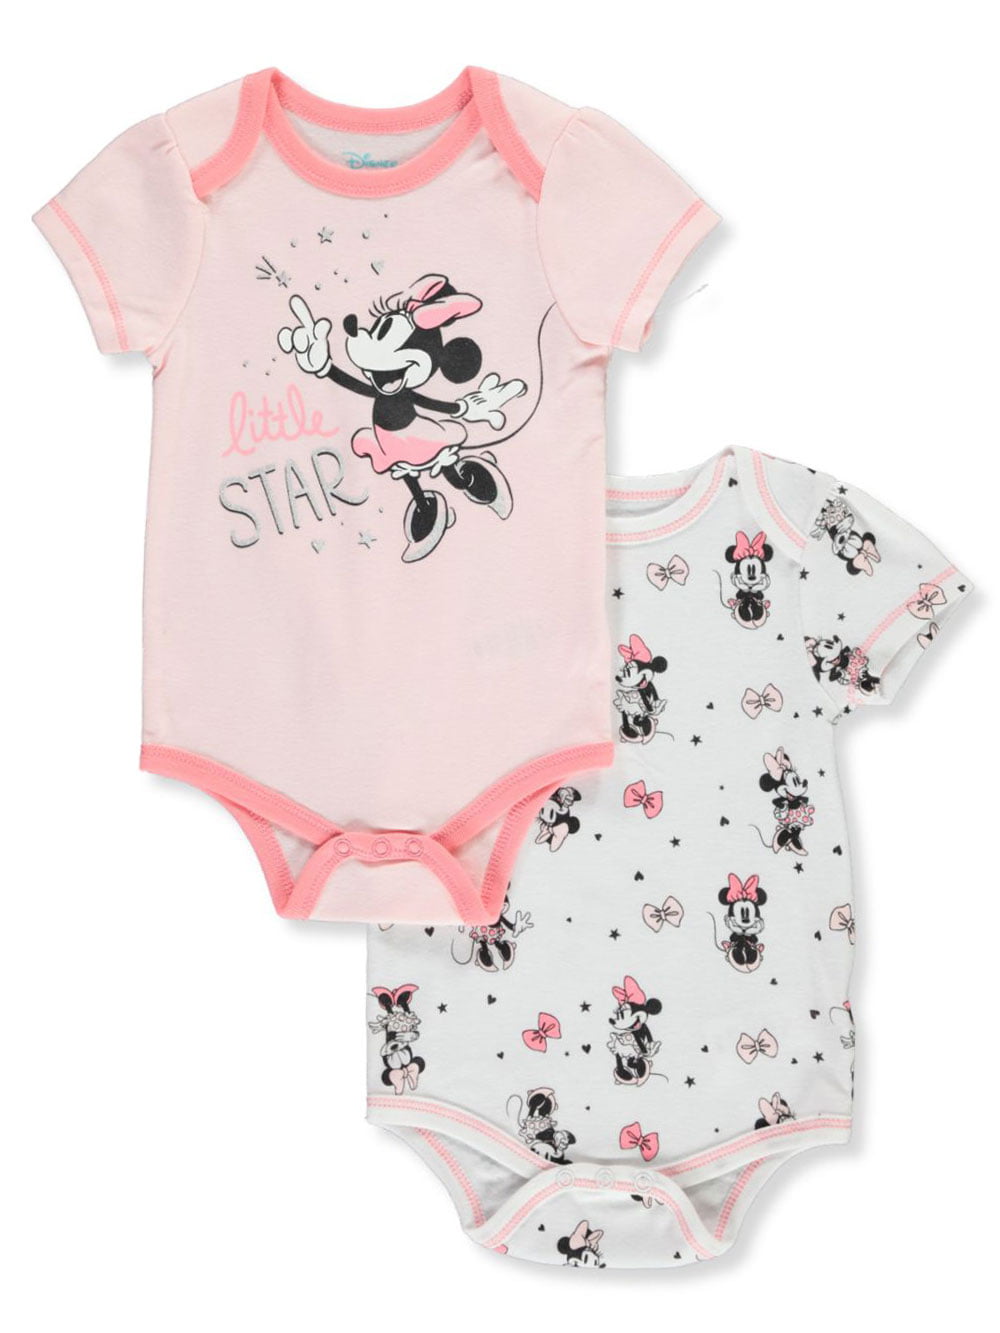 NEW Minnie Mouse Disney Baby Girl Bodysuit Spring Summer Floral Print Pink 